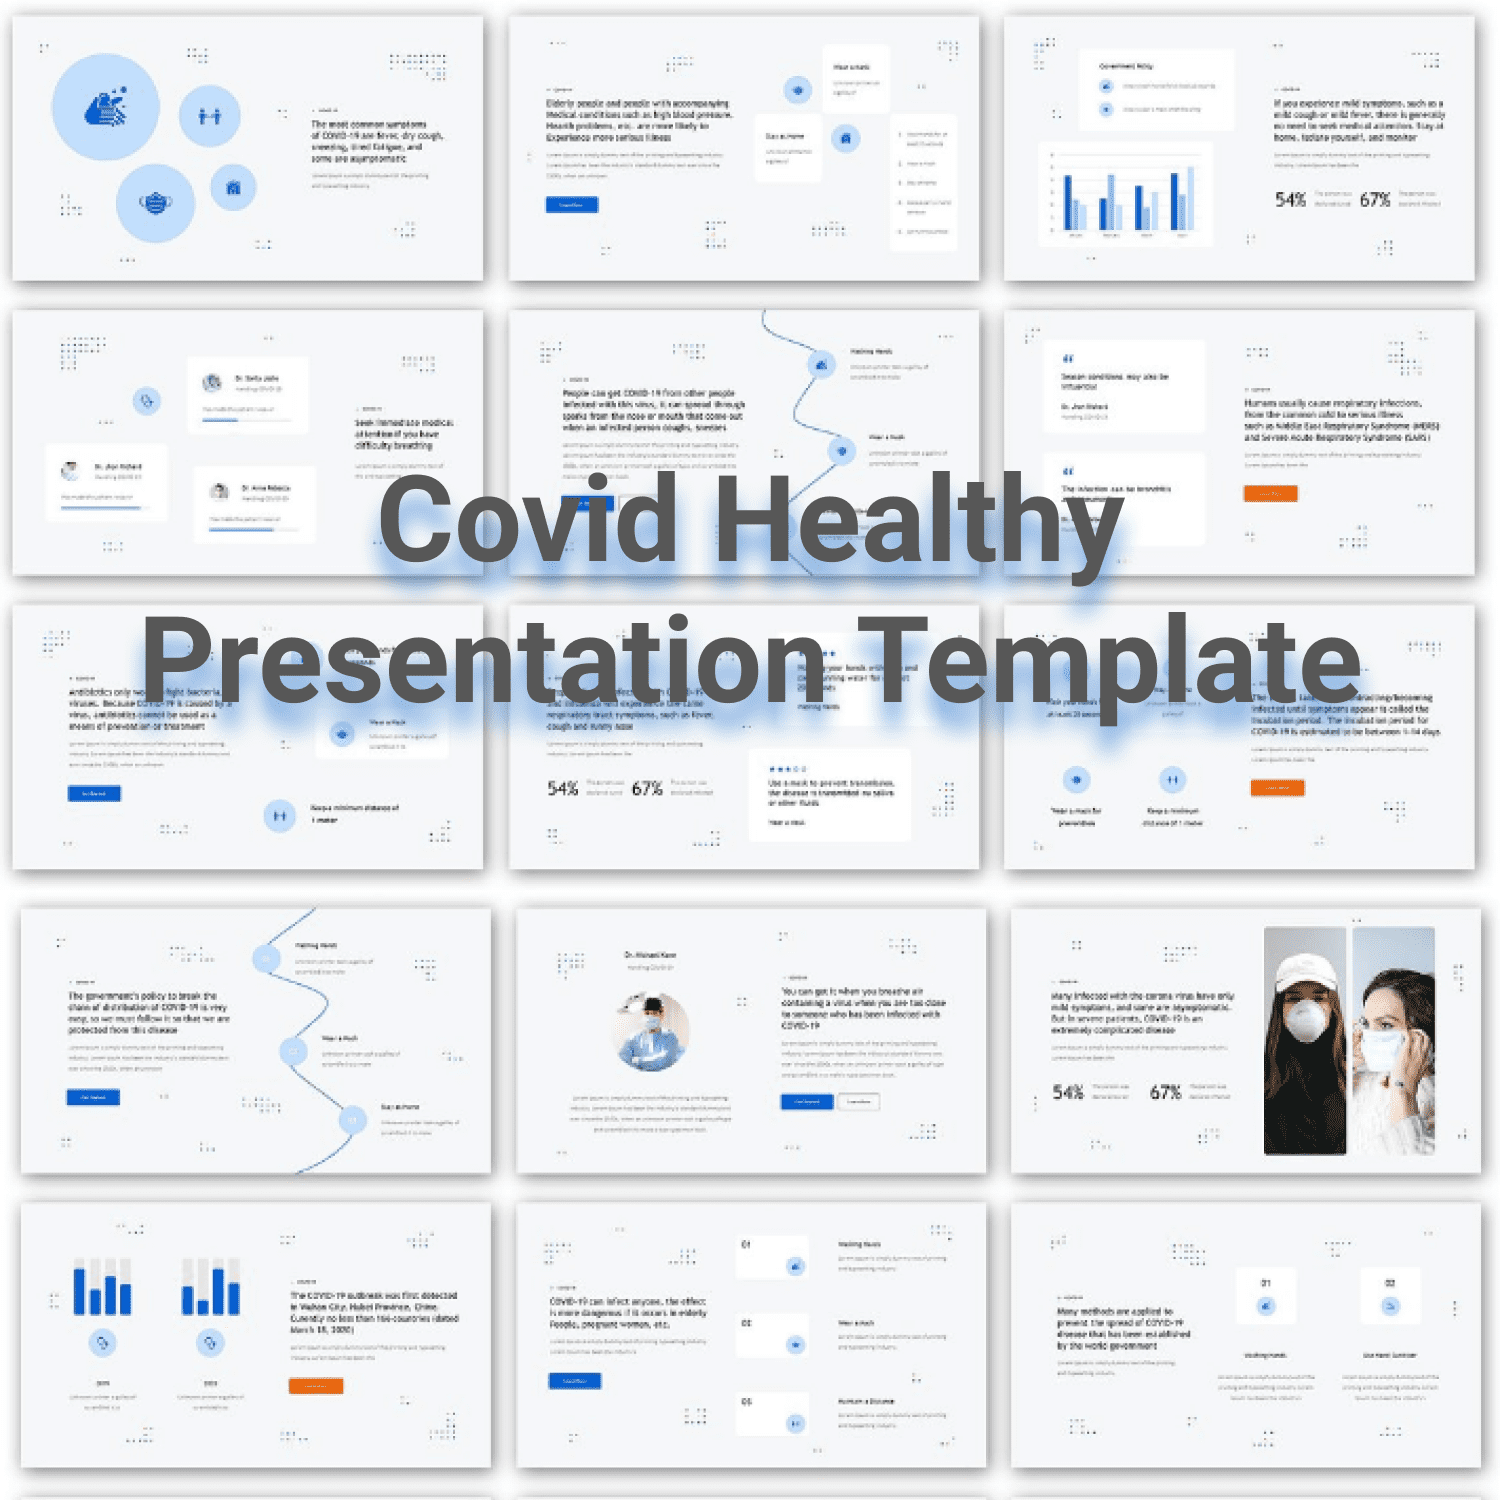 [Image: 02-Covid-Healthy-1500x1500-1.png]